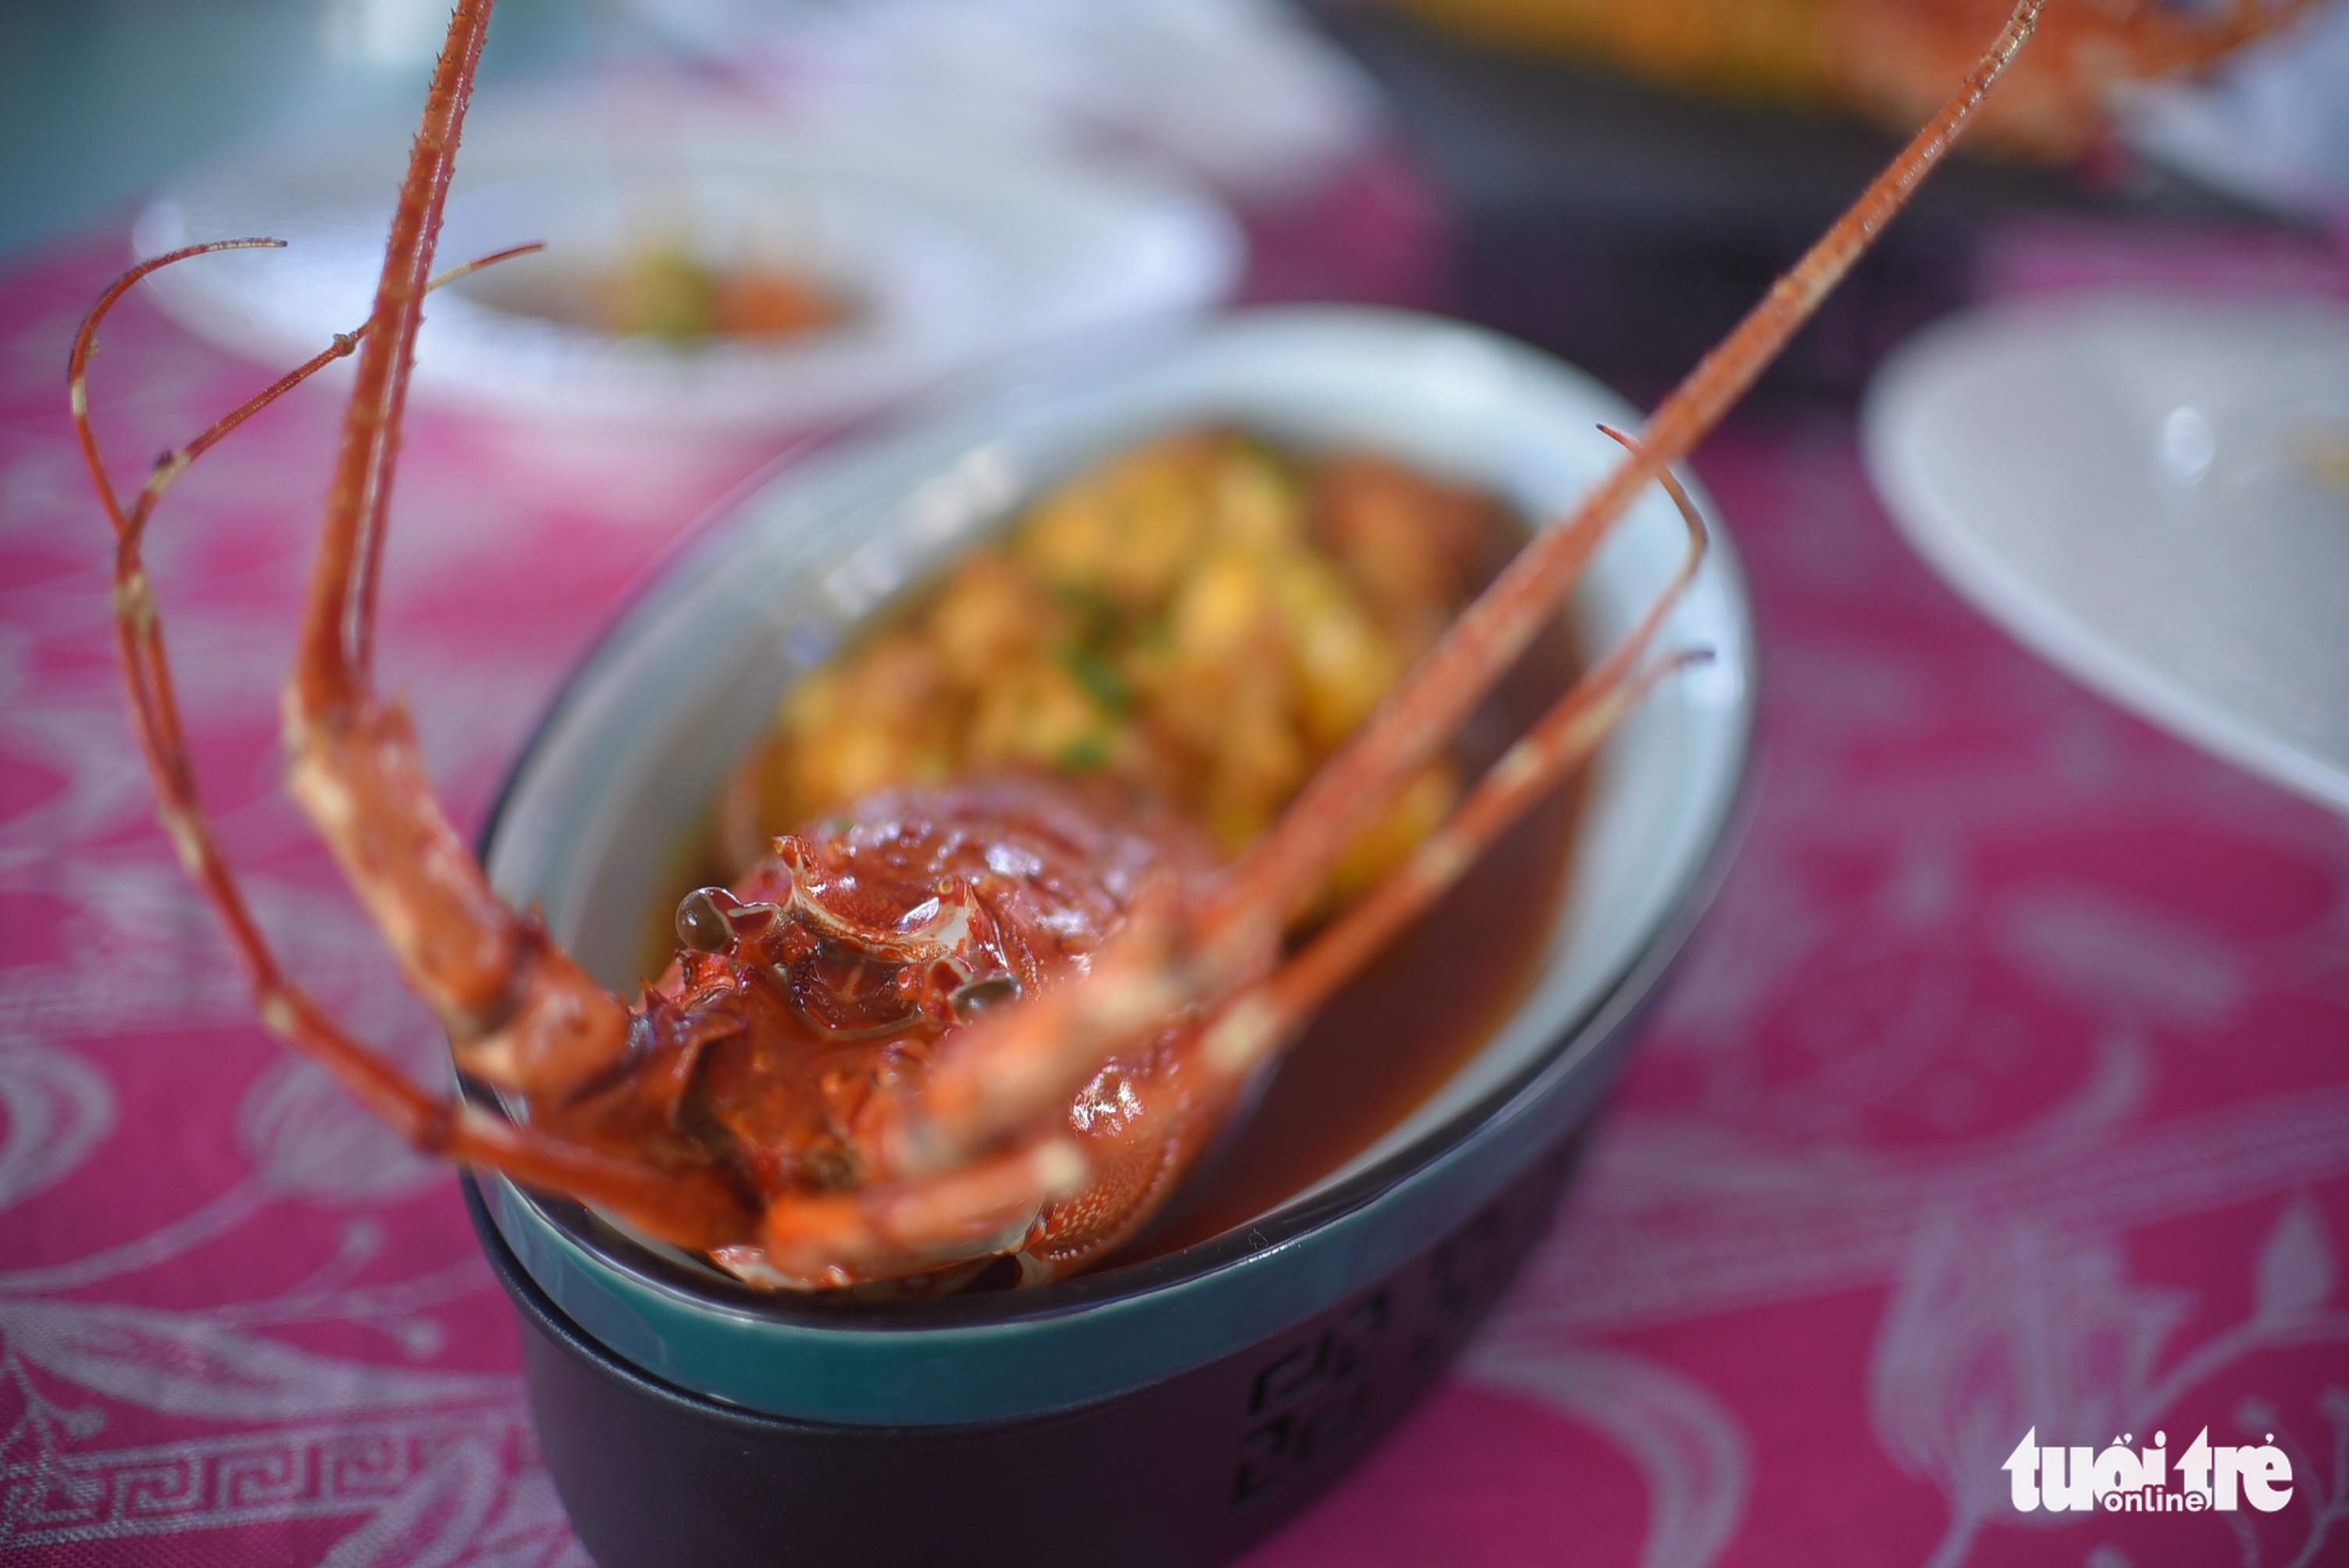 A lobster soup on display at a culinary contest in Phu Yen Province, Vietnam, July 31, 2022. Photo: Lam Thien / Tuoi Tre